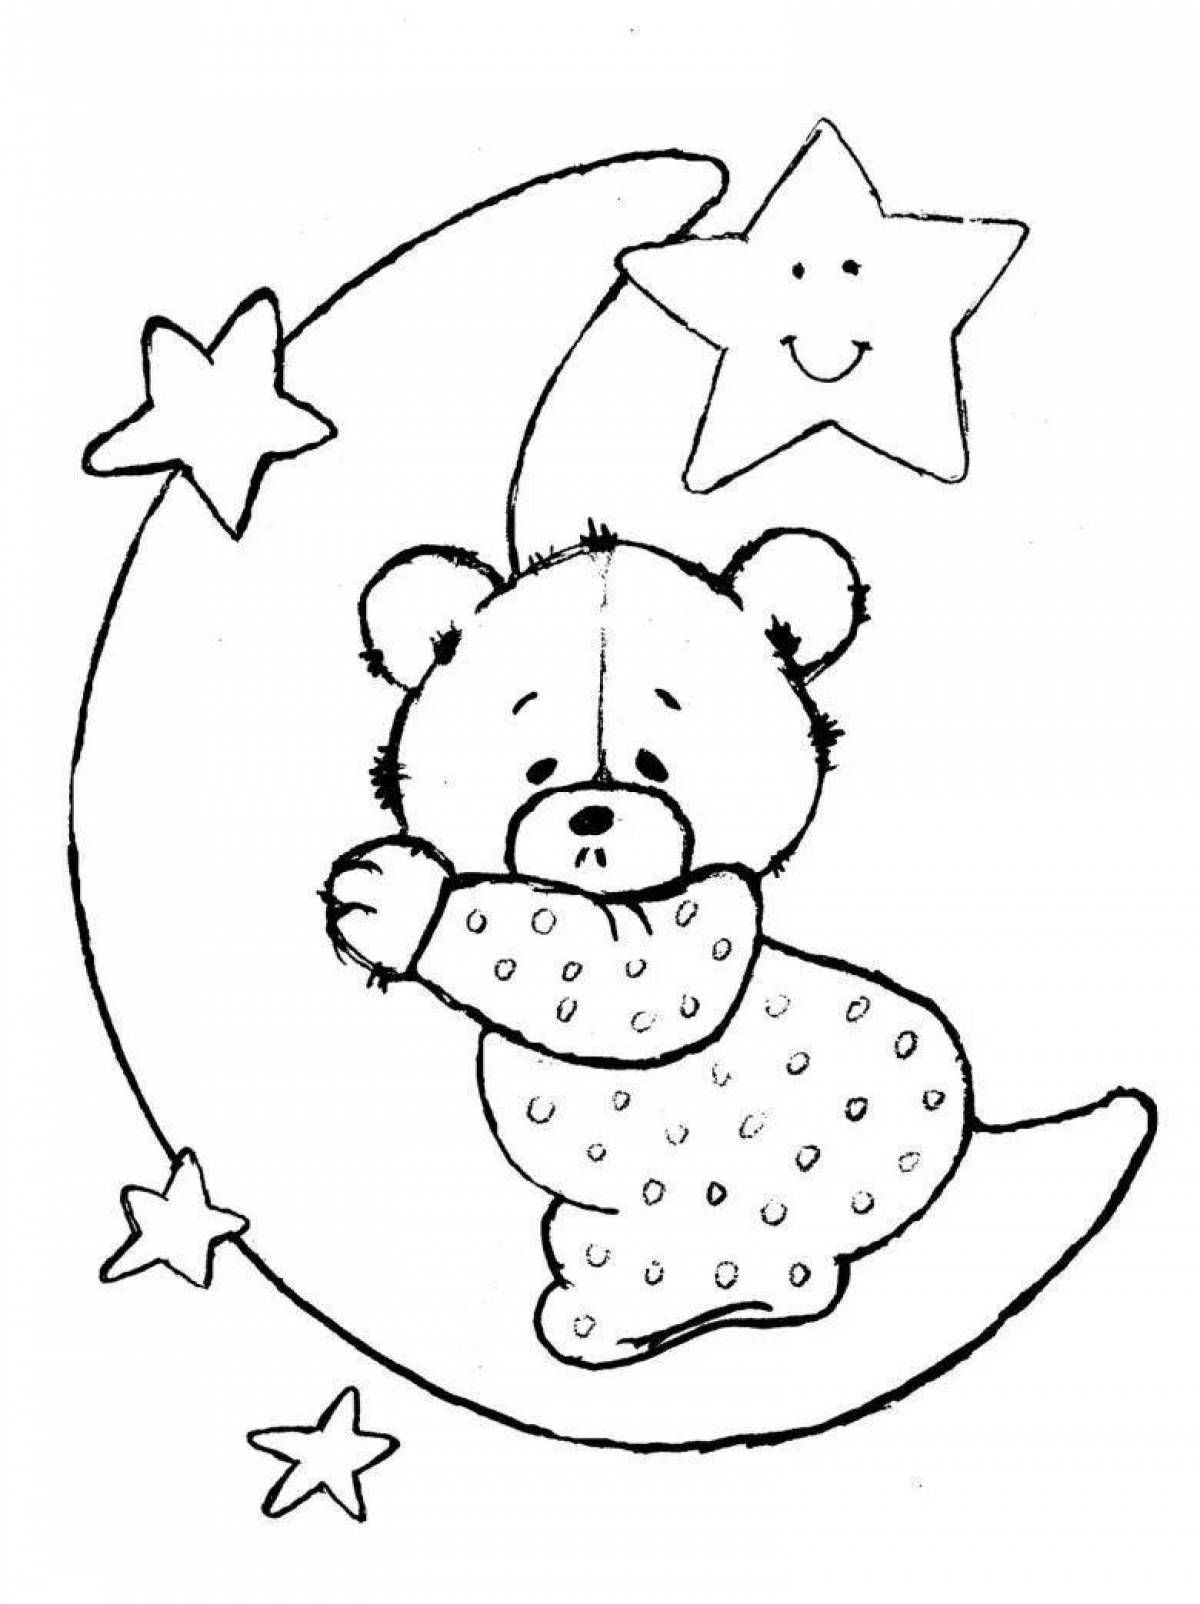 Coloring page adorable bear on the moon